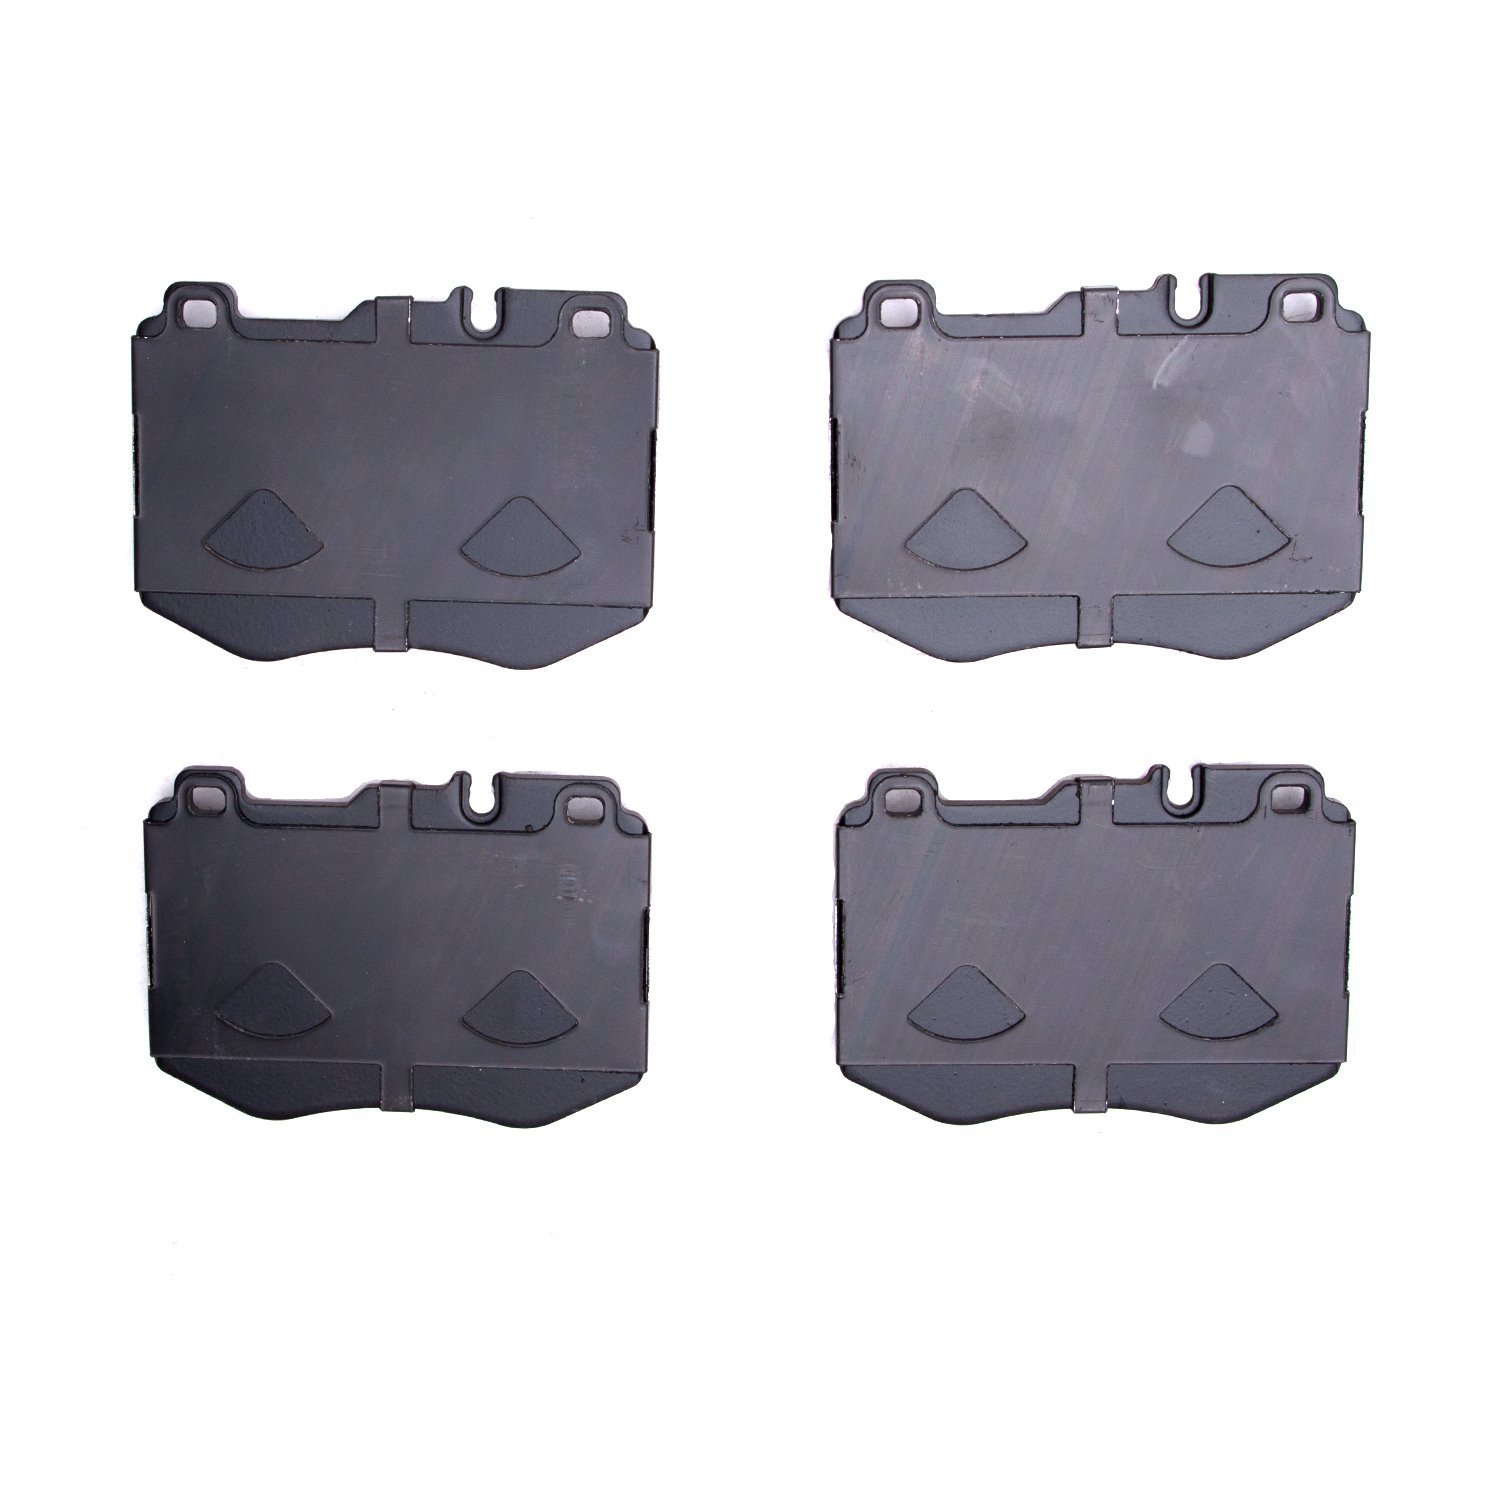 1600-1796-00 5000 Euro Ceramic Brake Pads, Fits Select Mercedes-Benz, Position: Front